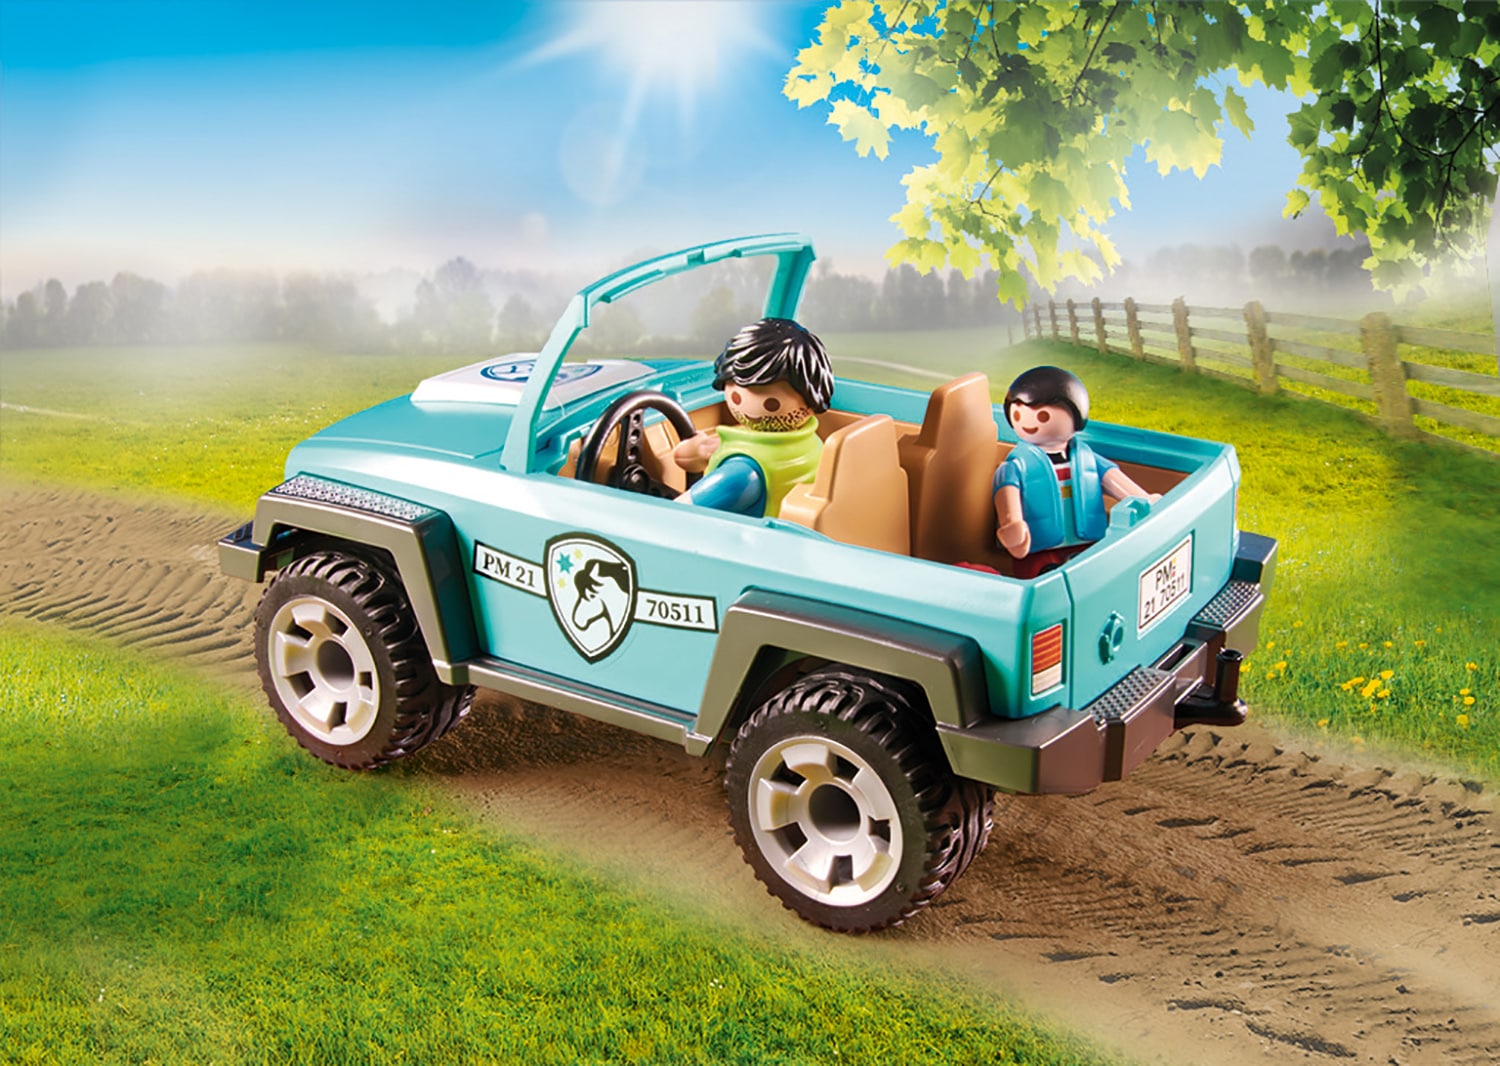 Playmobil® Konstruktions-Spielset »PKW mit Ponyanhänger (70511), Country«, (44 St.), Made in Germany